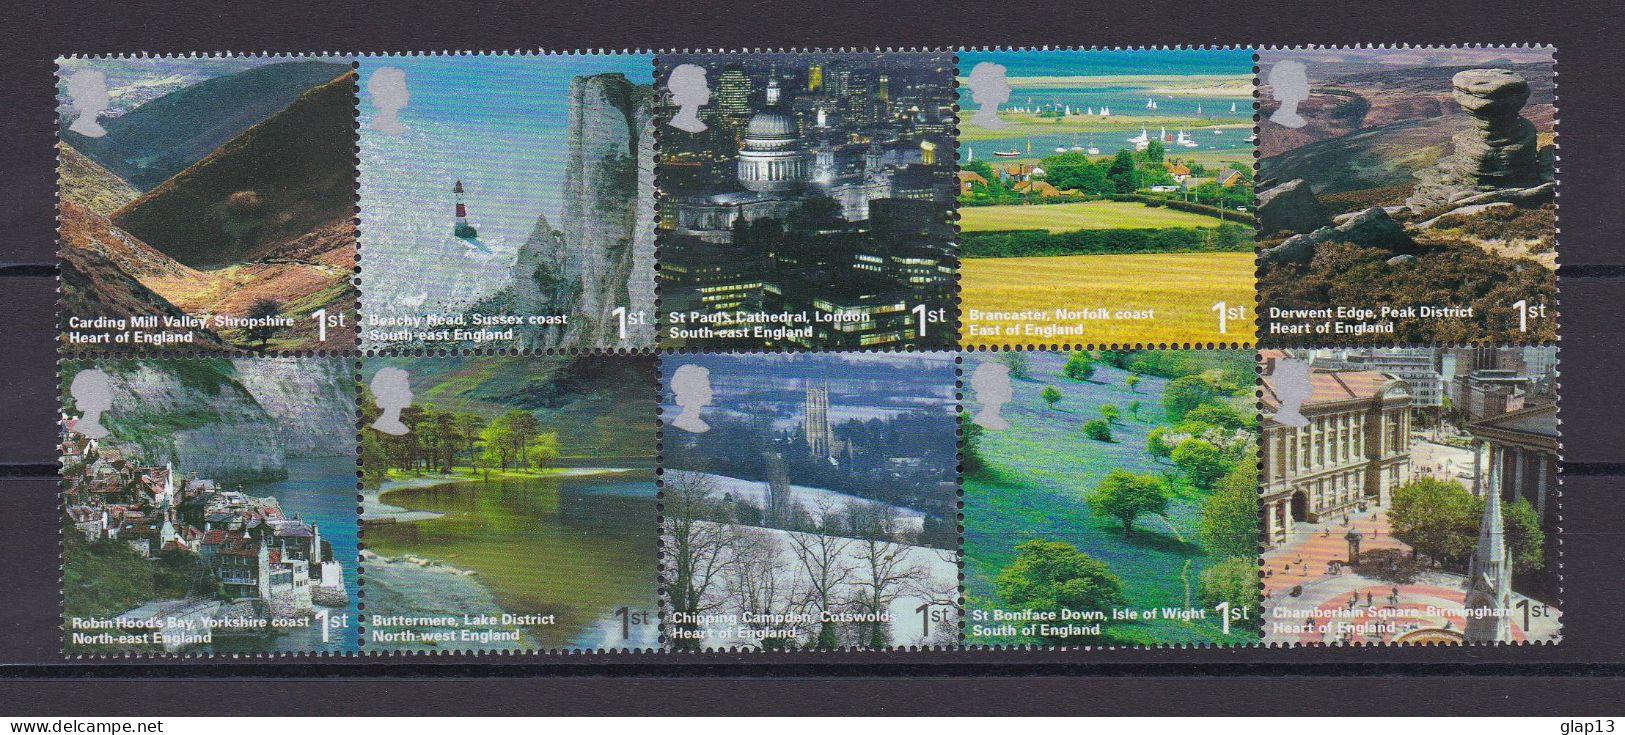 GRANDE-BRETAGNE 2006 TIMBRE N°2720/29 NEUF** PAYSAGES - Neufs